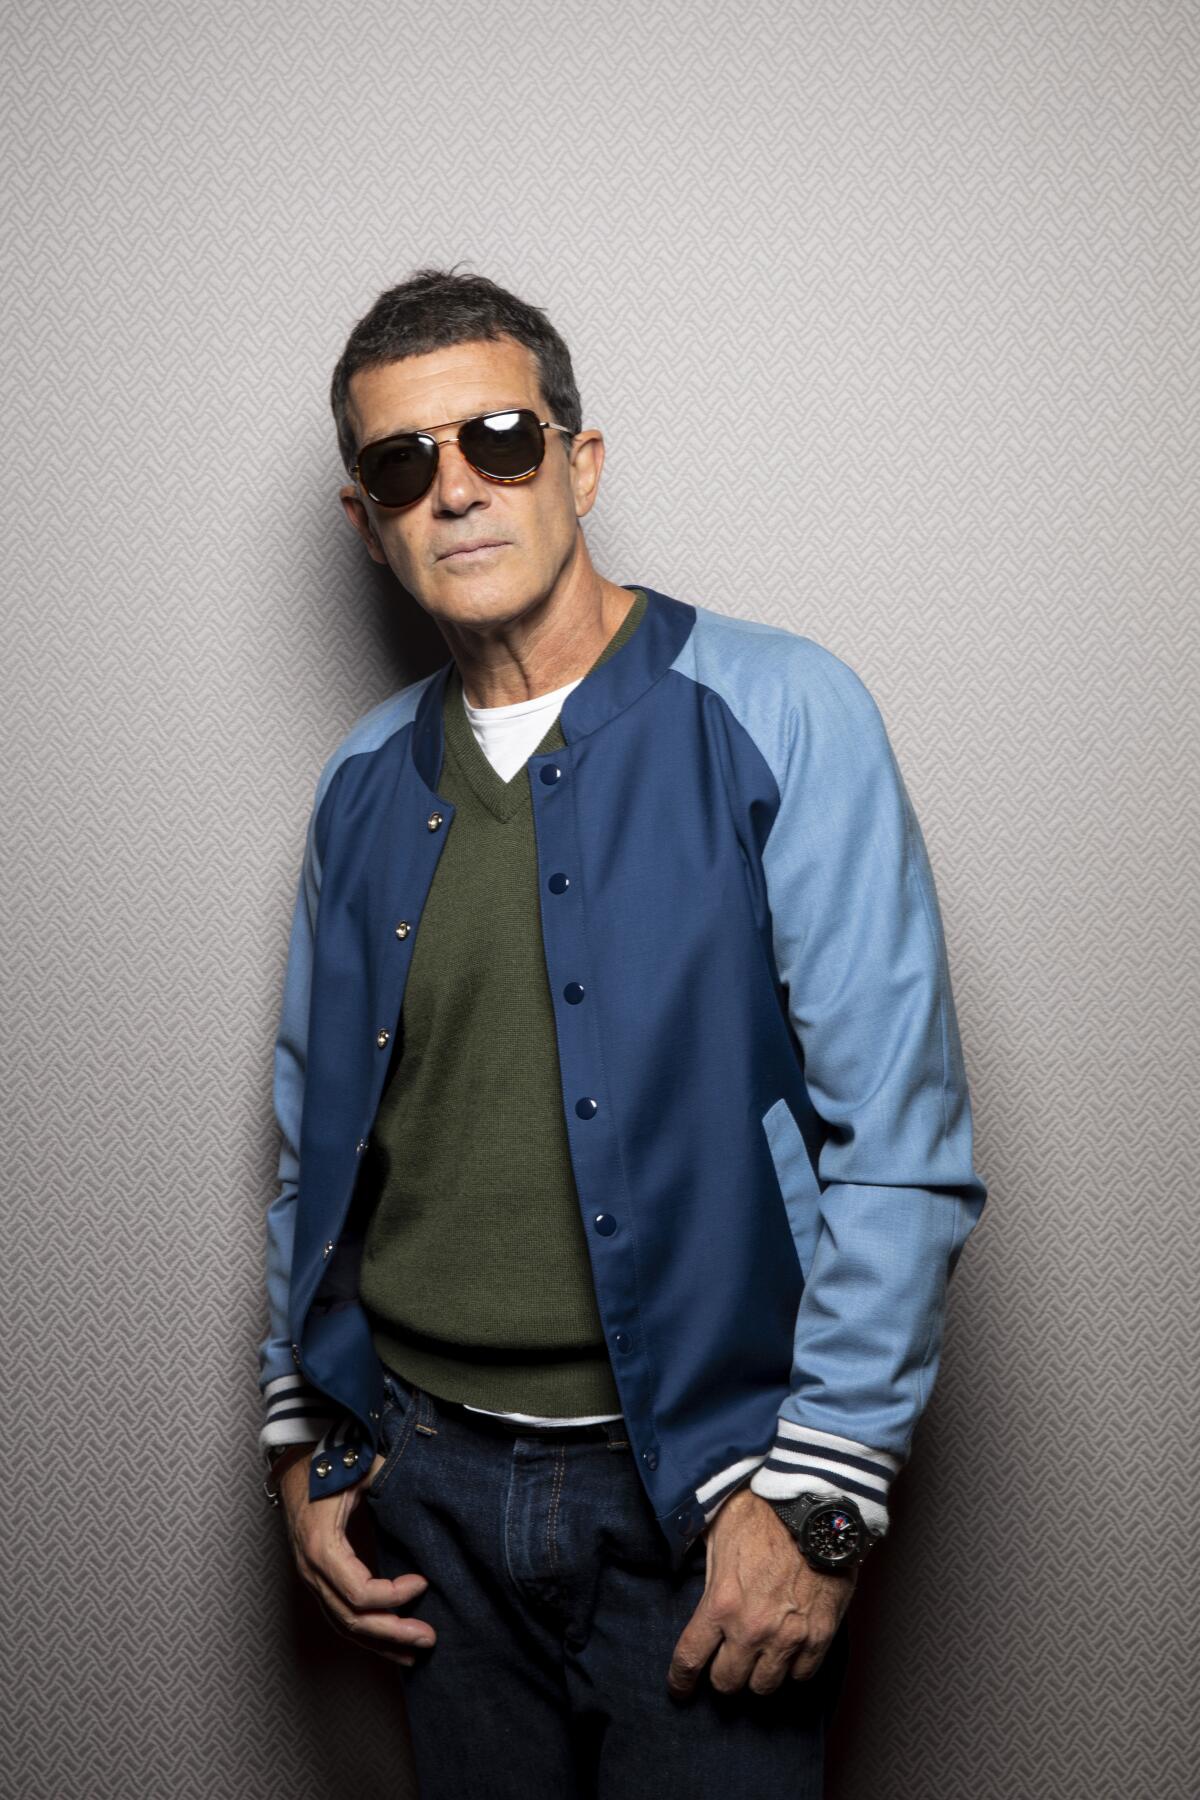 Antonio Banderas, who stars in Pedro Almodovar's new film, "Pain and Glory," in the L.A. Times Photo Studio at the Toronto International Film Festival.